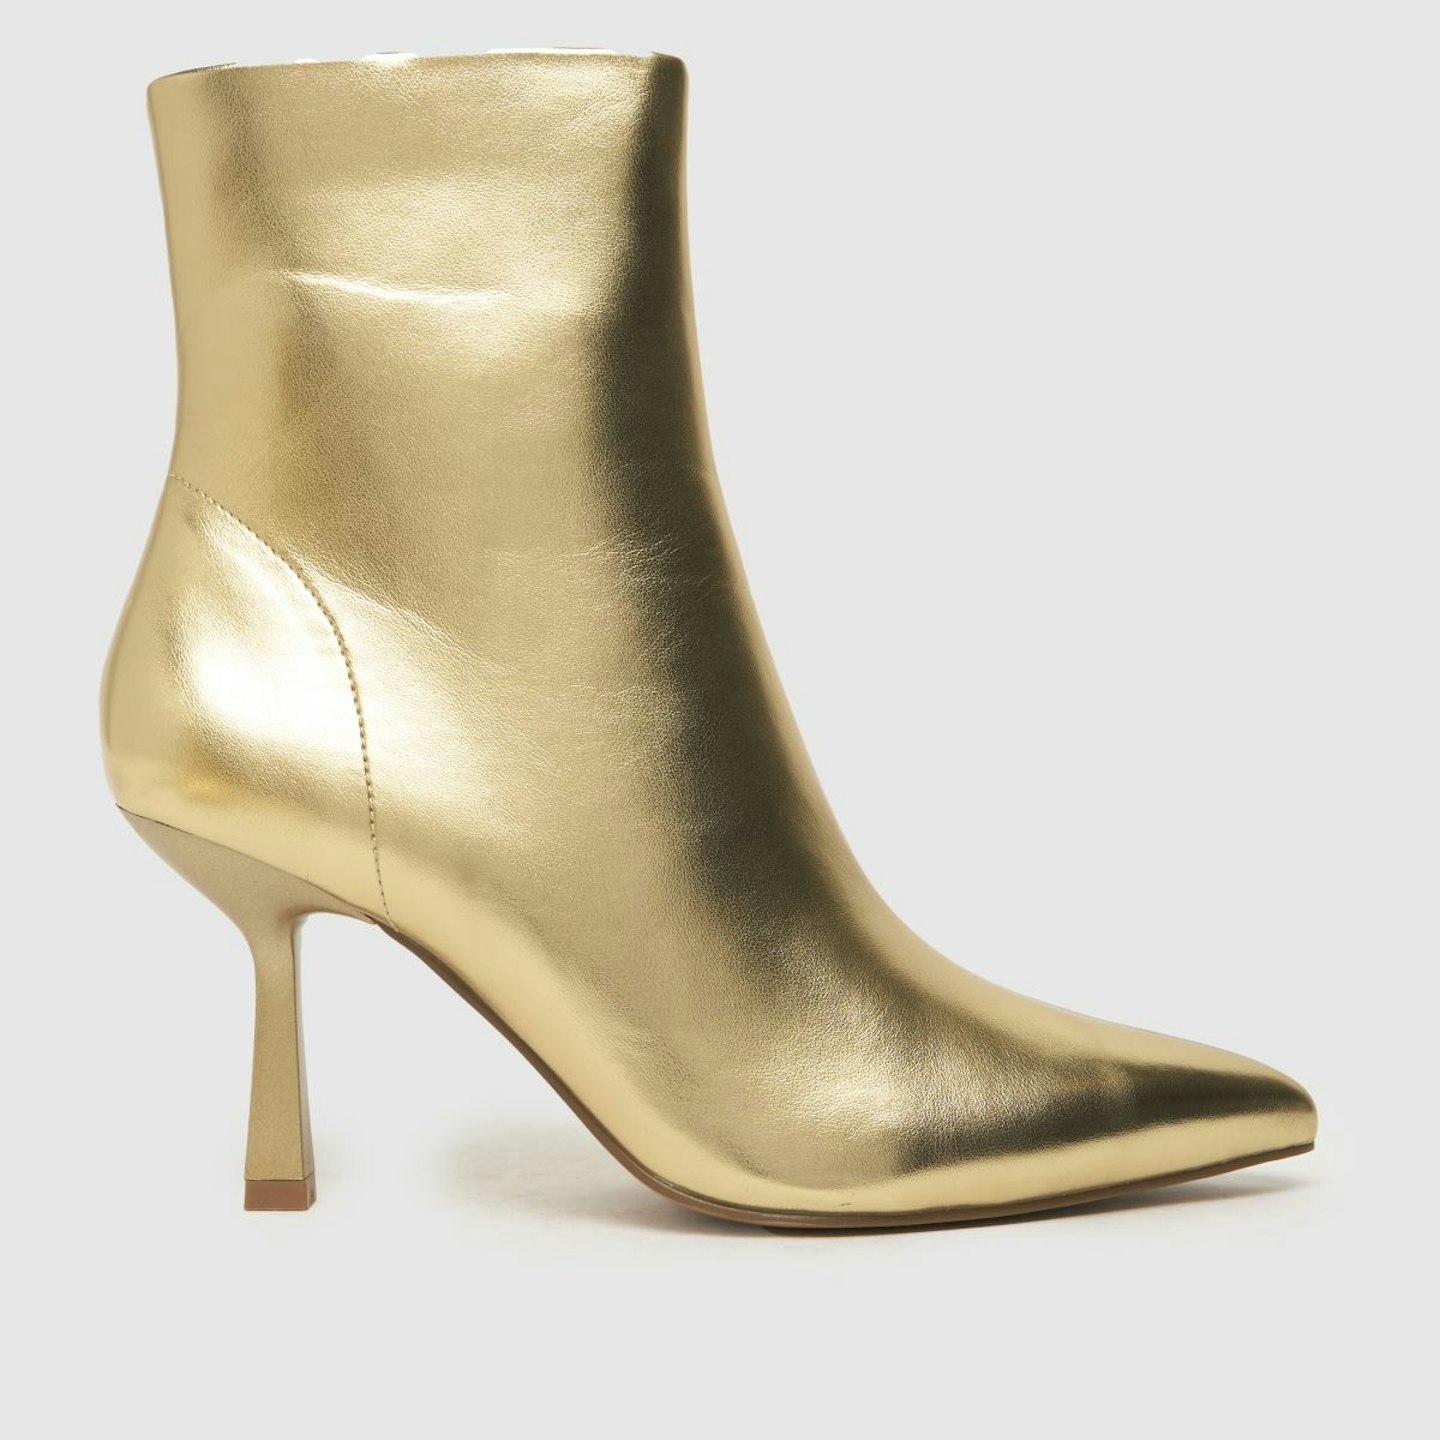 Schuh Bethan Stiletto Boots In Gold